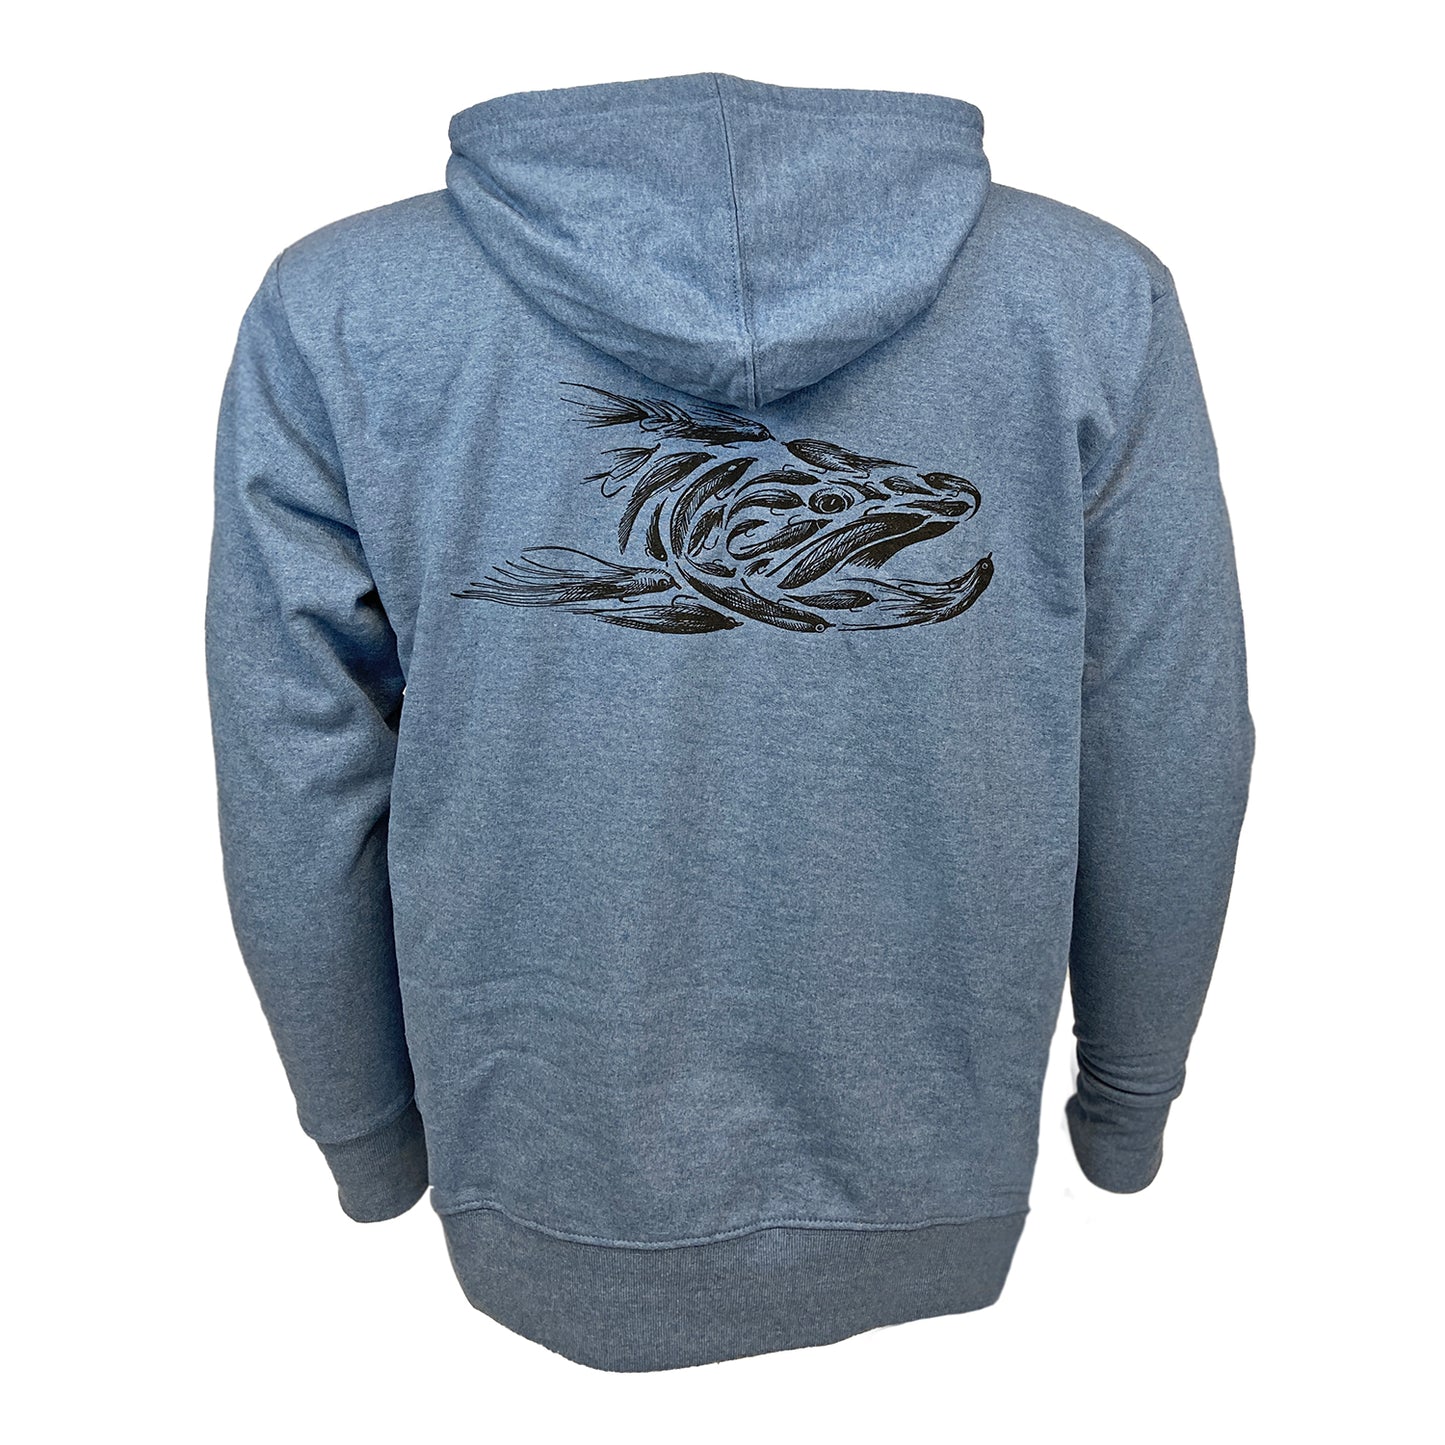 Blue hoody shown from the back with artistically rendered flies forming a trout head across the shoulder blades.